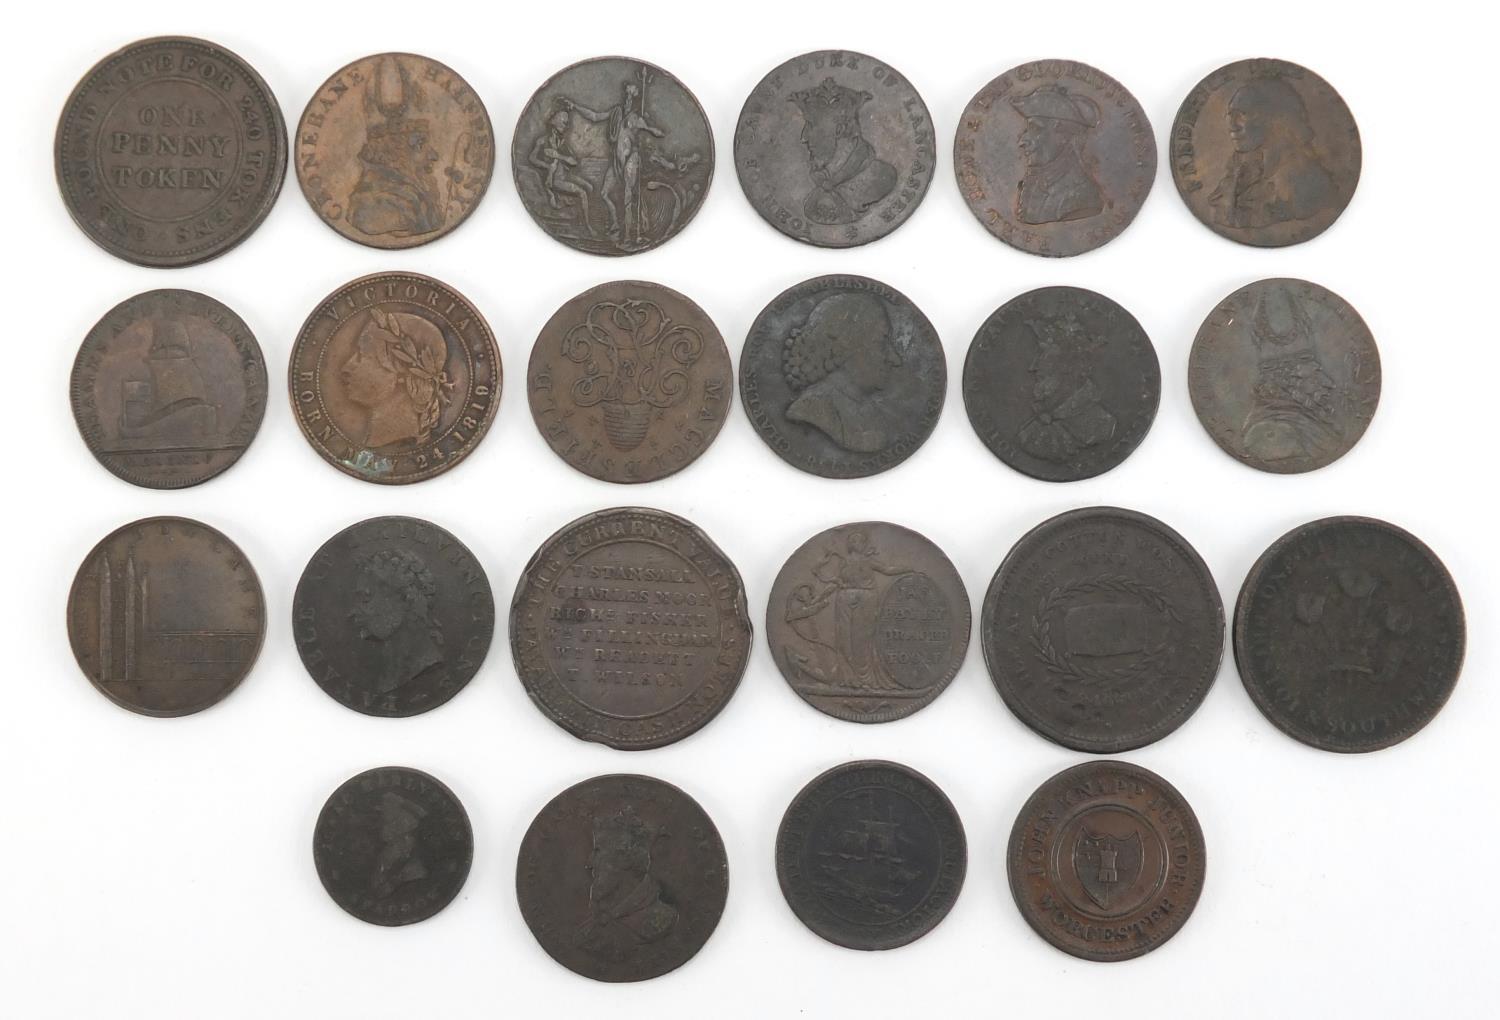 Twenty two late 18th early 19th century tokens and half pennies including Iohn of Gaunt Duke of